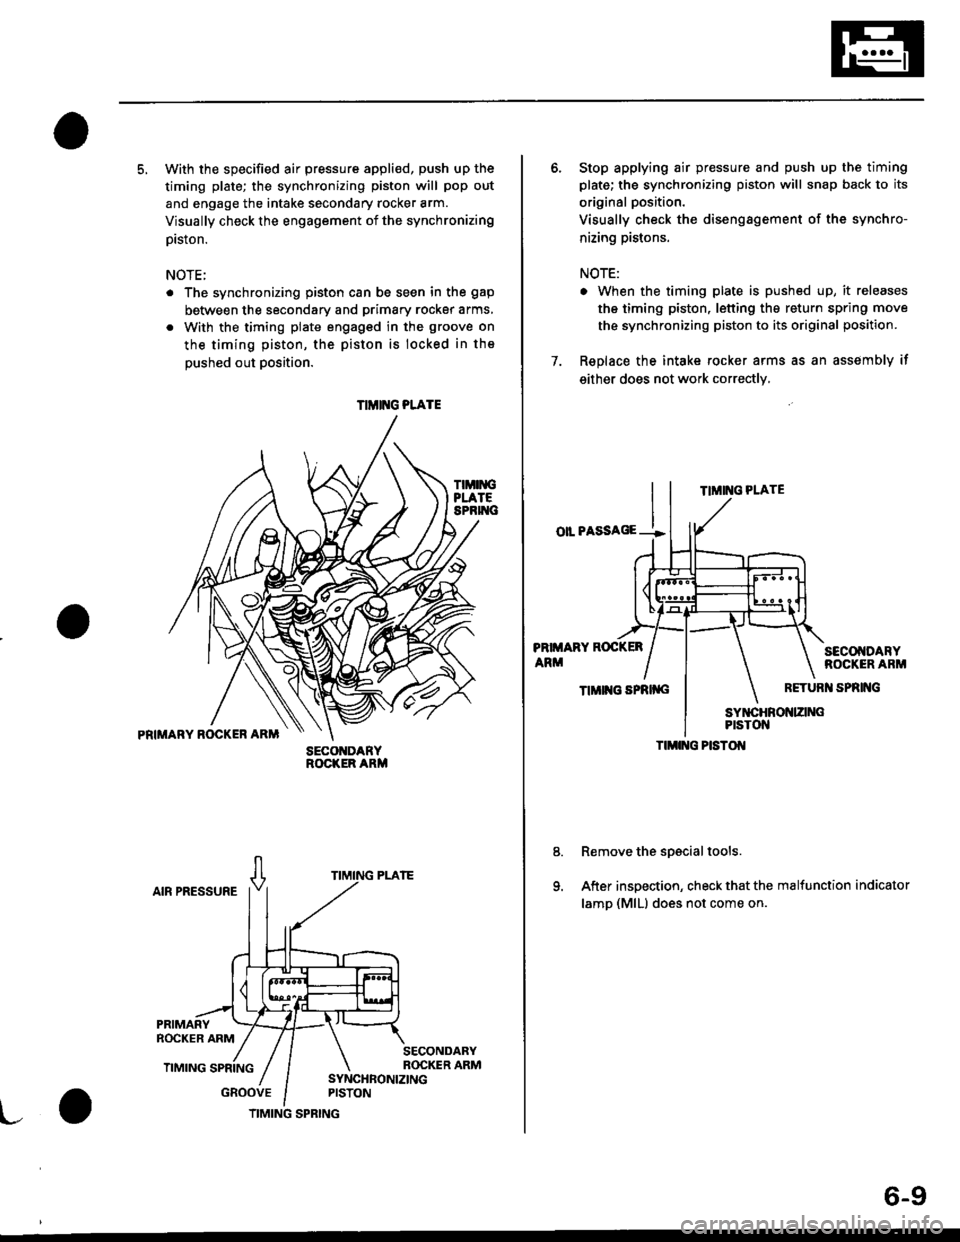 HONDA CIVIC 2000 6.G Workshop Manual 5. With the specified air pressure appli€d, push up the
timing plate; the synchronizing piston will pop out
and engage the intake secondary rocker arm.
Visually check the engagement of the synchroni